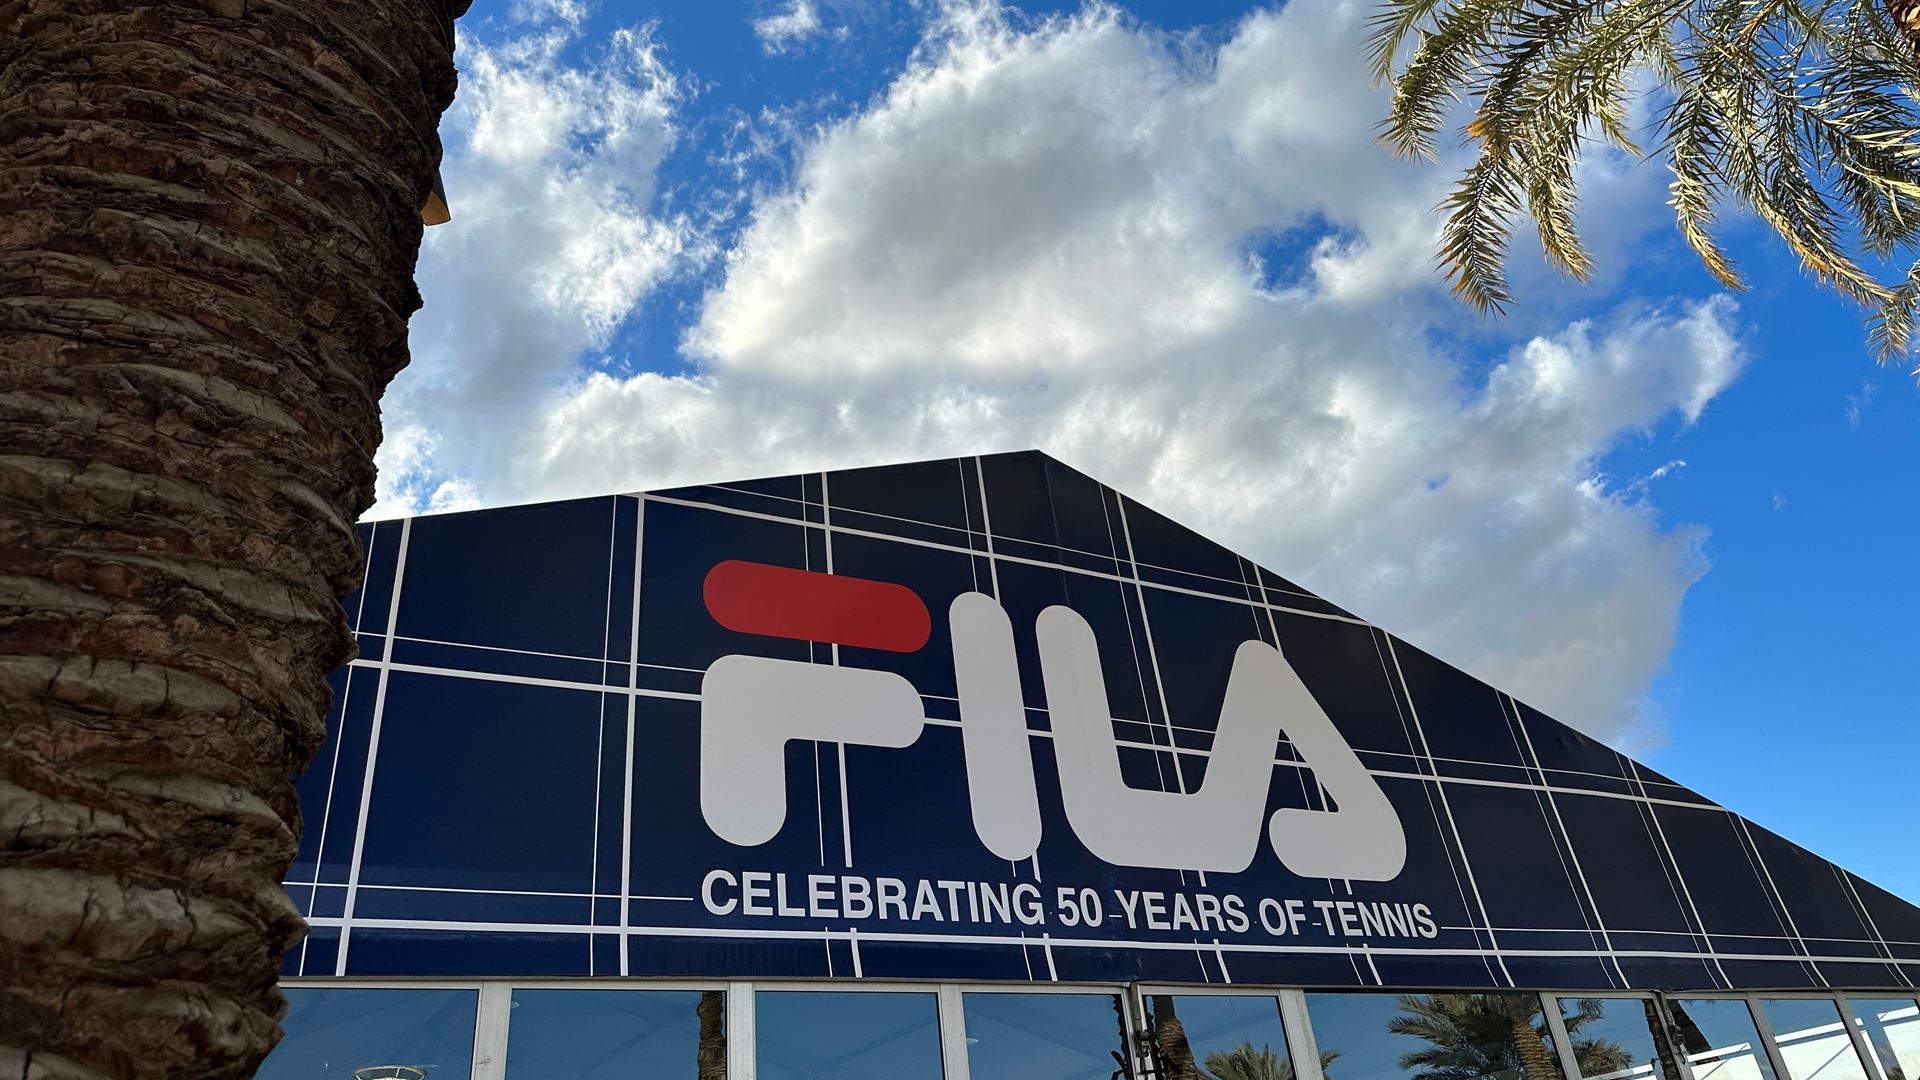 FILA’s Past, Present, And Future Take Center Stage At 2023 BNP Paribas Open With ‘50 Years in Tennis’ Celebration